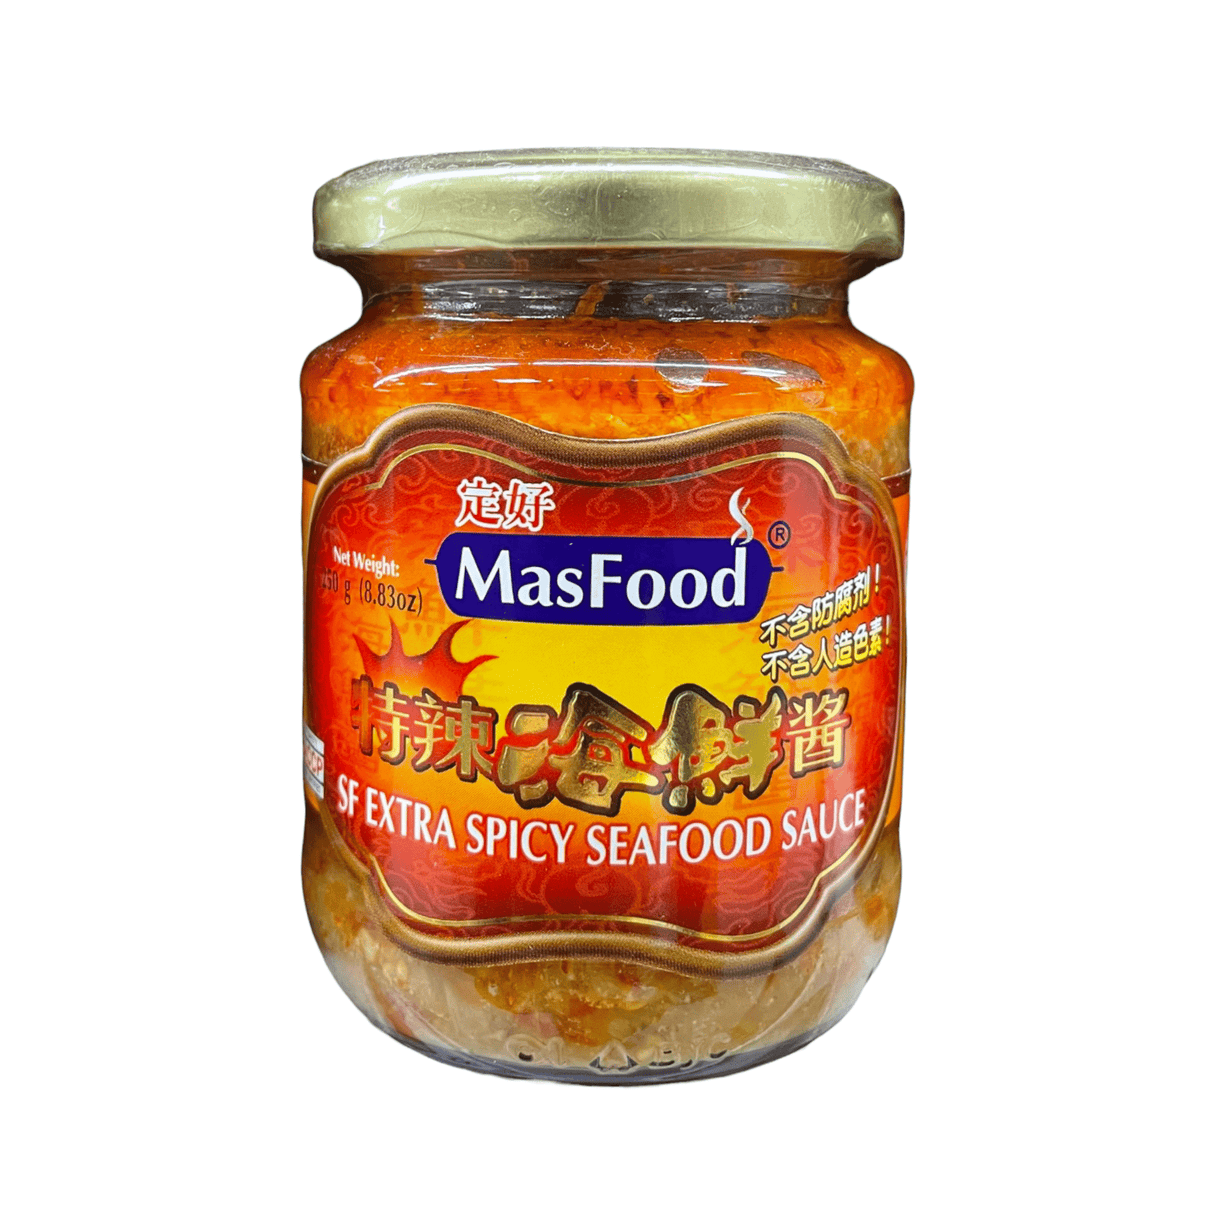 MasFood Sf Extra Spicy Seafood Sauce